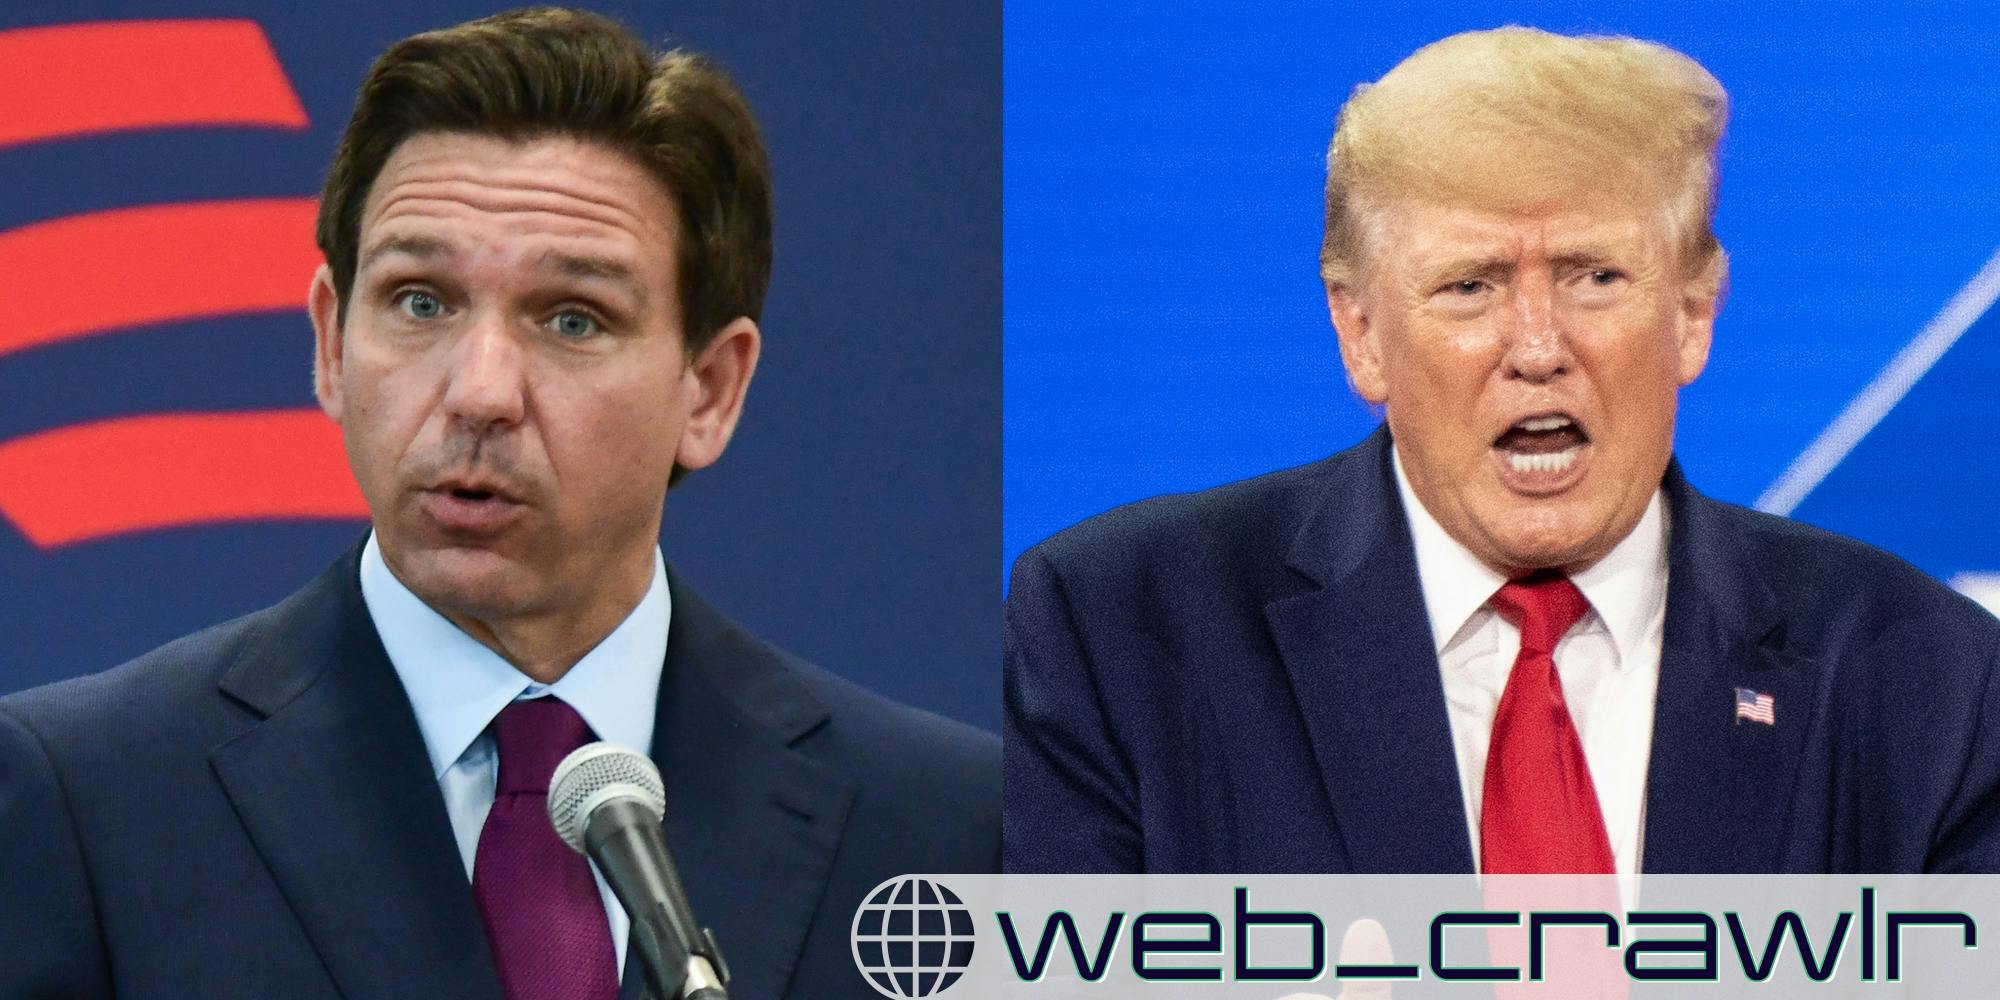 Ron DeSantis and Donald Trump. The Daily Dot newsletter web_crawlr logo is in the bottom right corner.